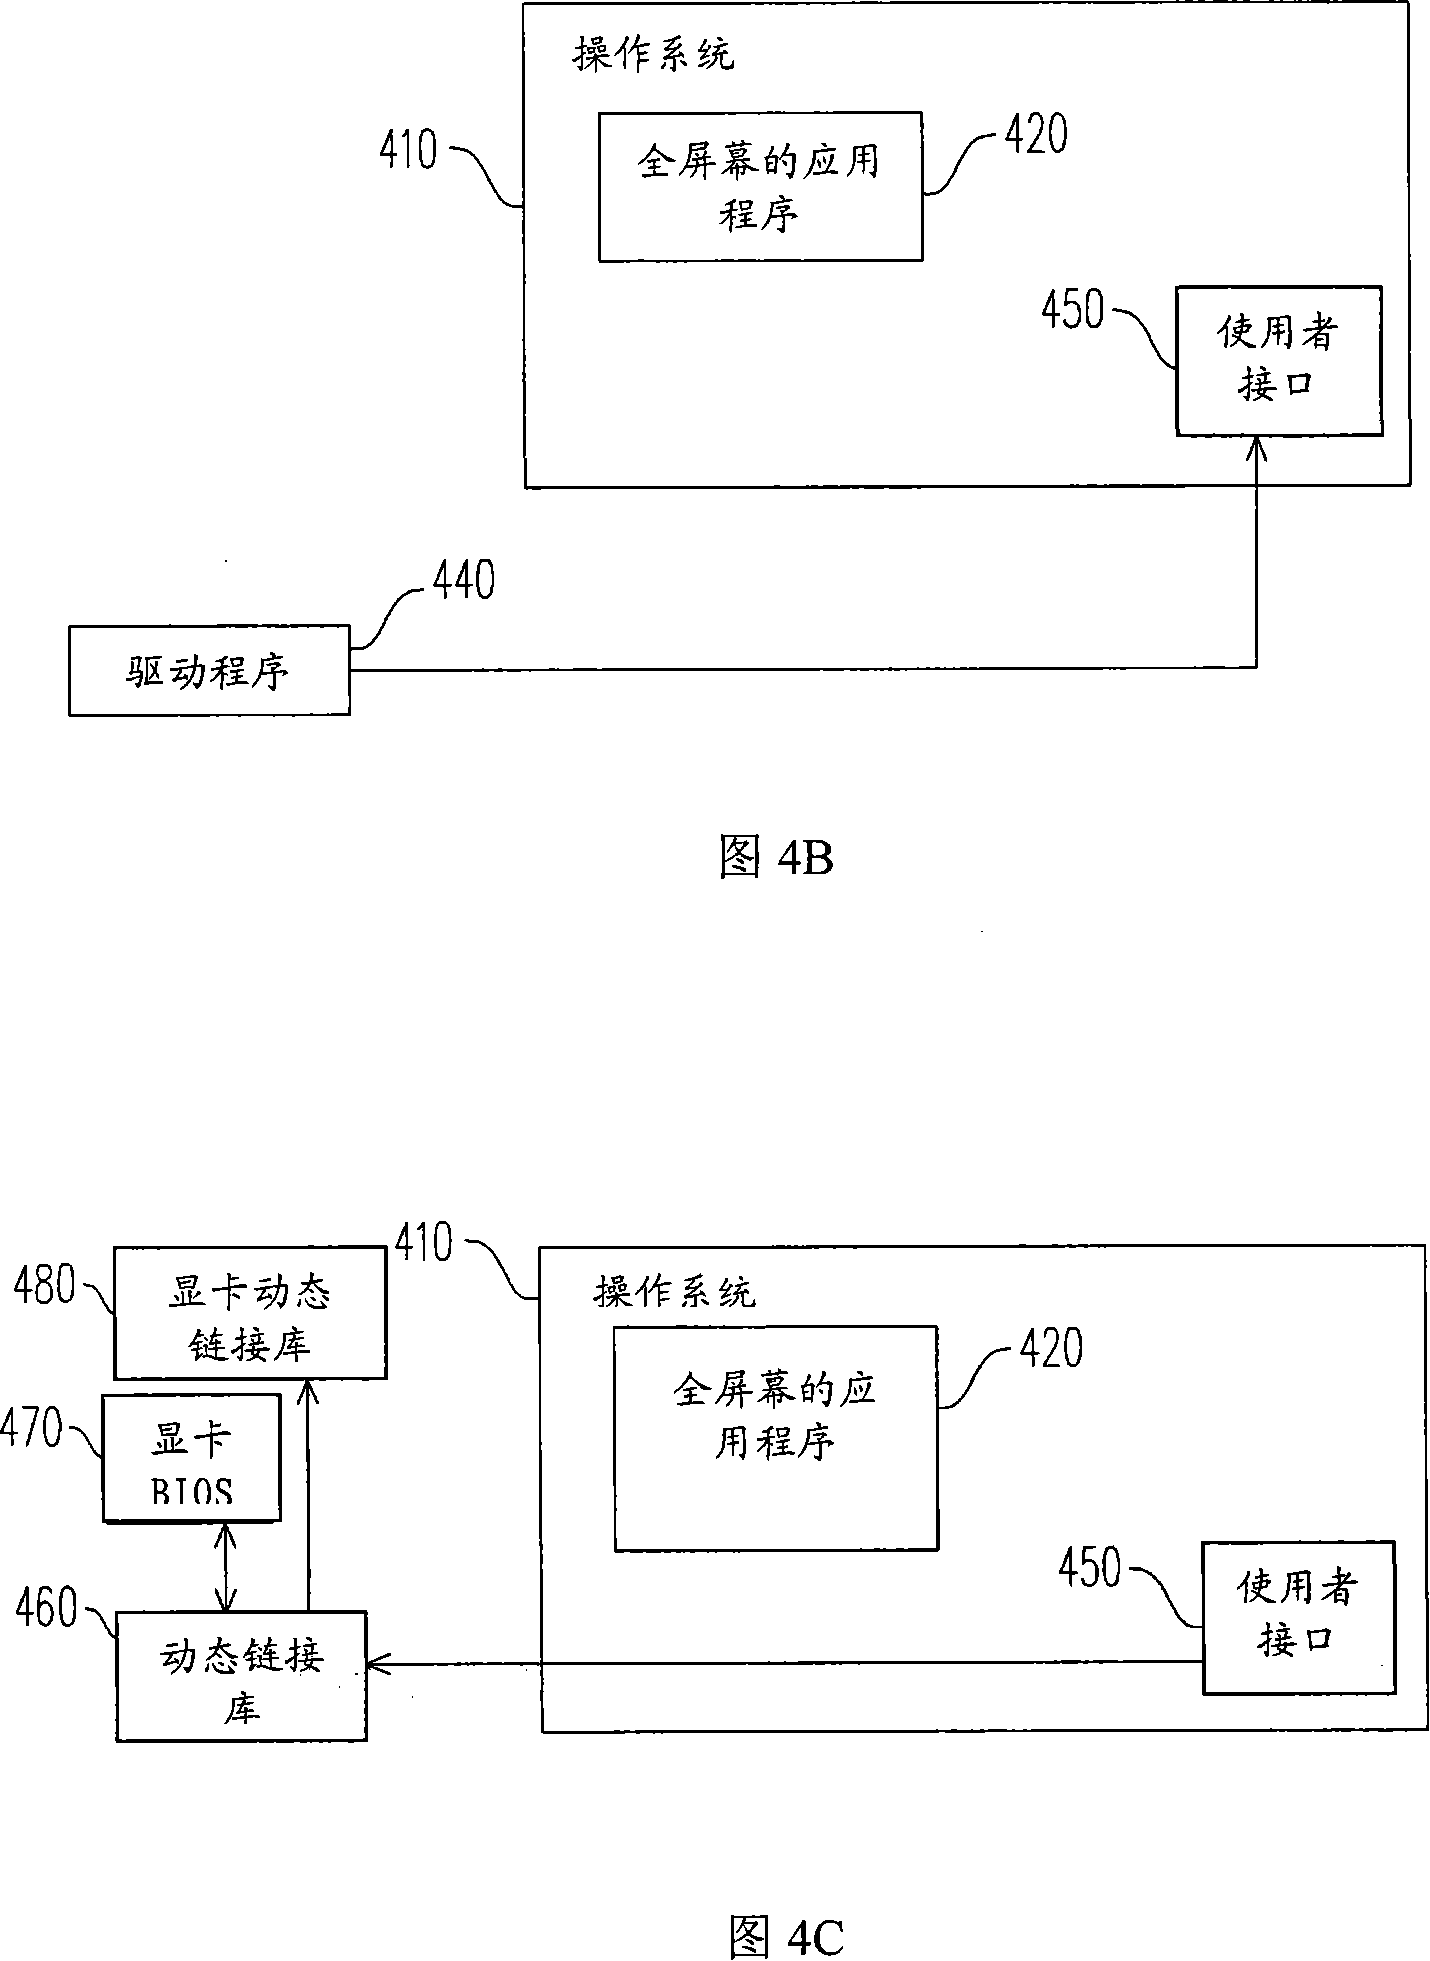 Method for adjusting working frequency of chip